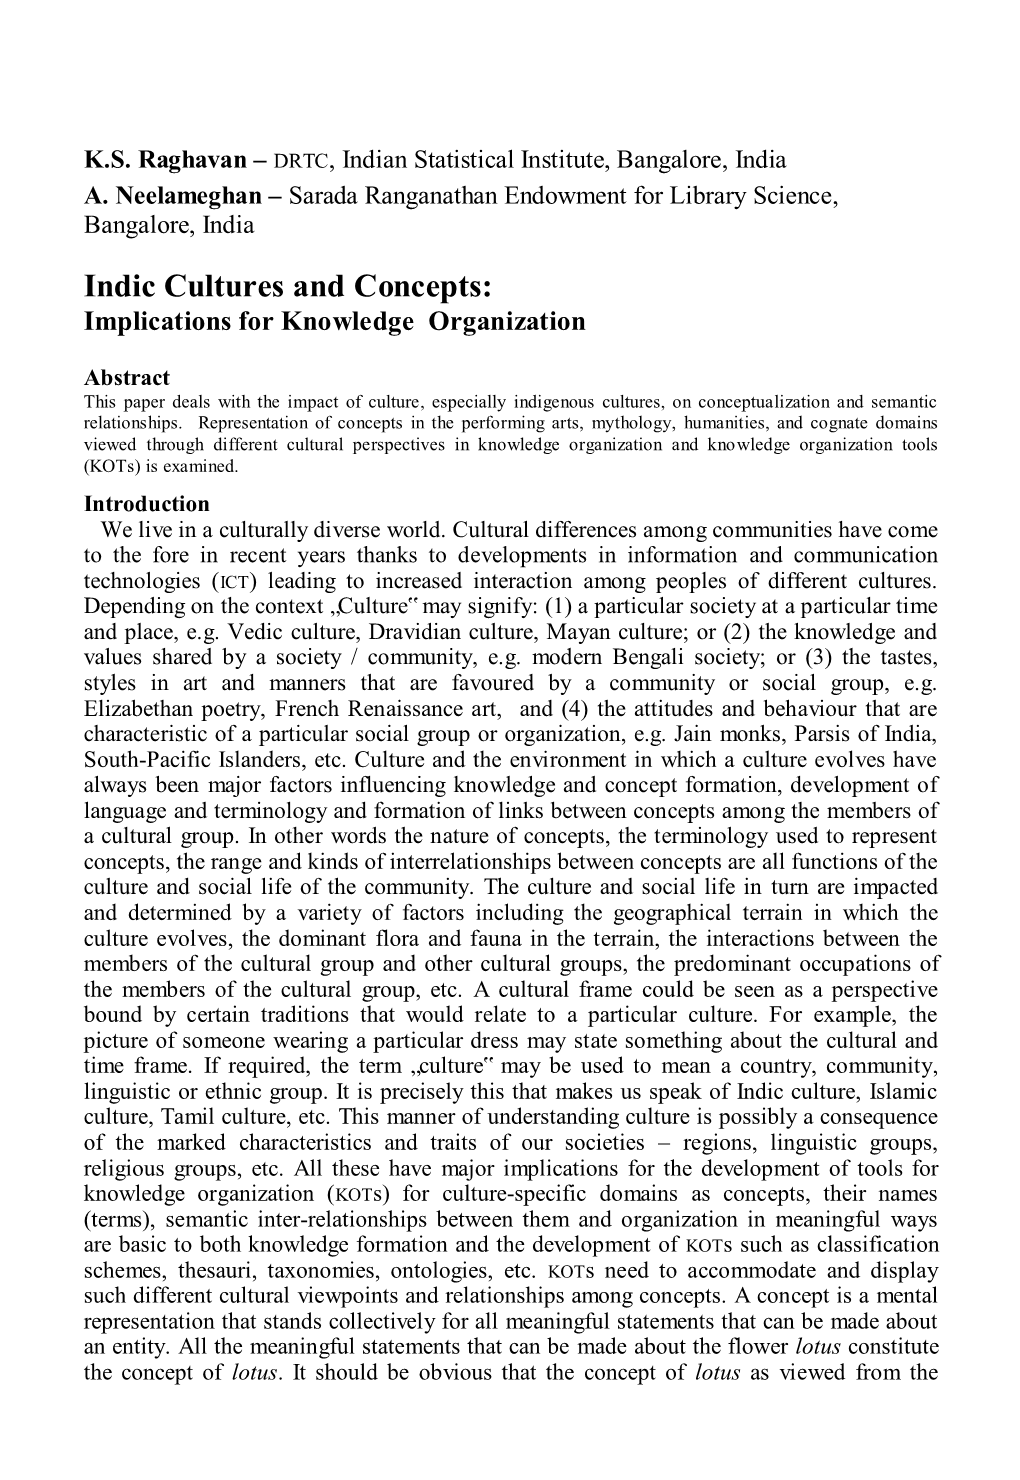 Indic Cultures and Concepts: Implications for Knowledge Organization